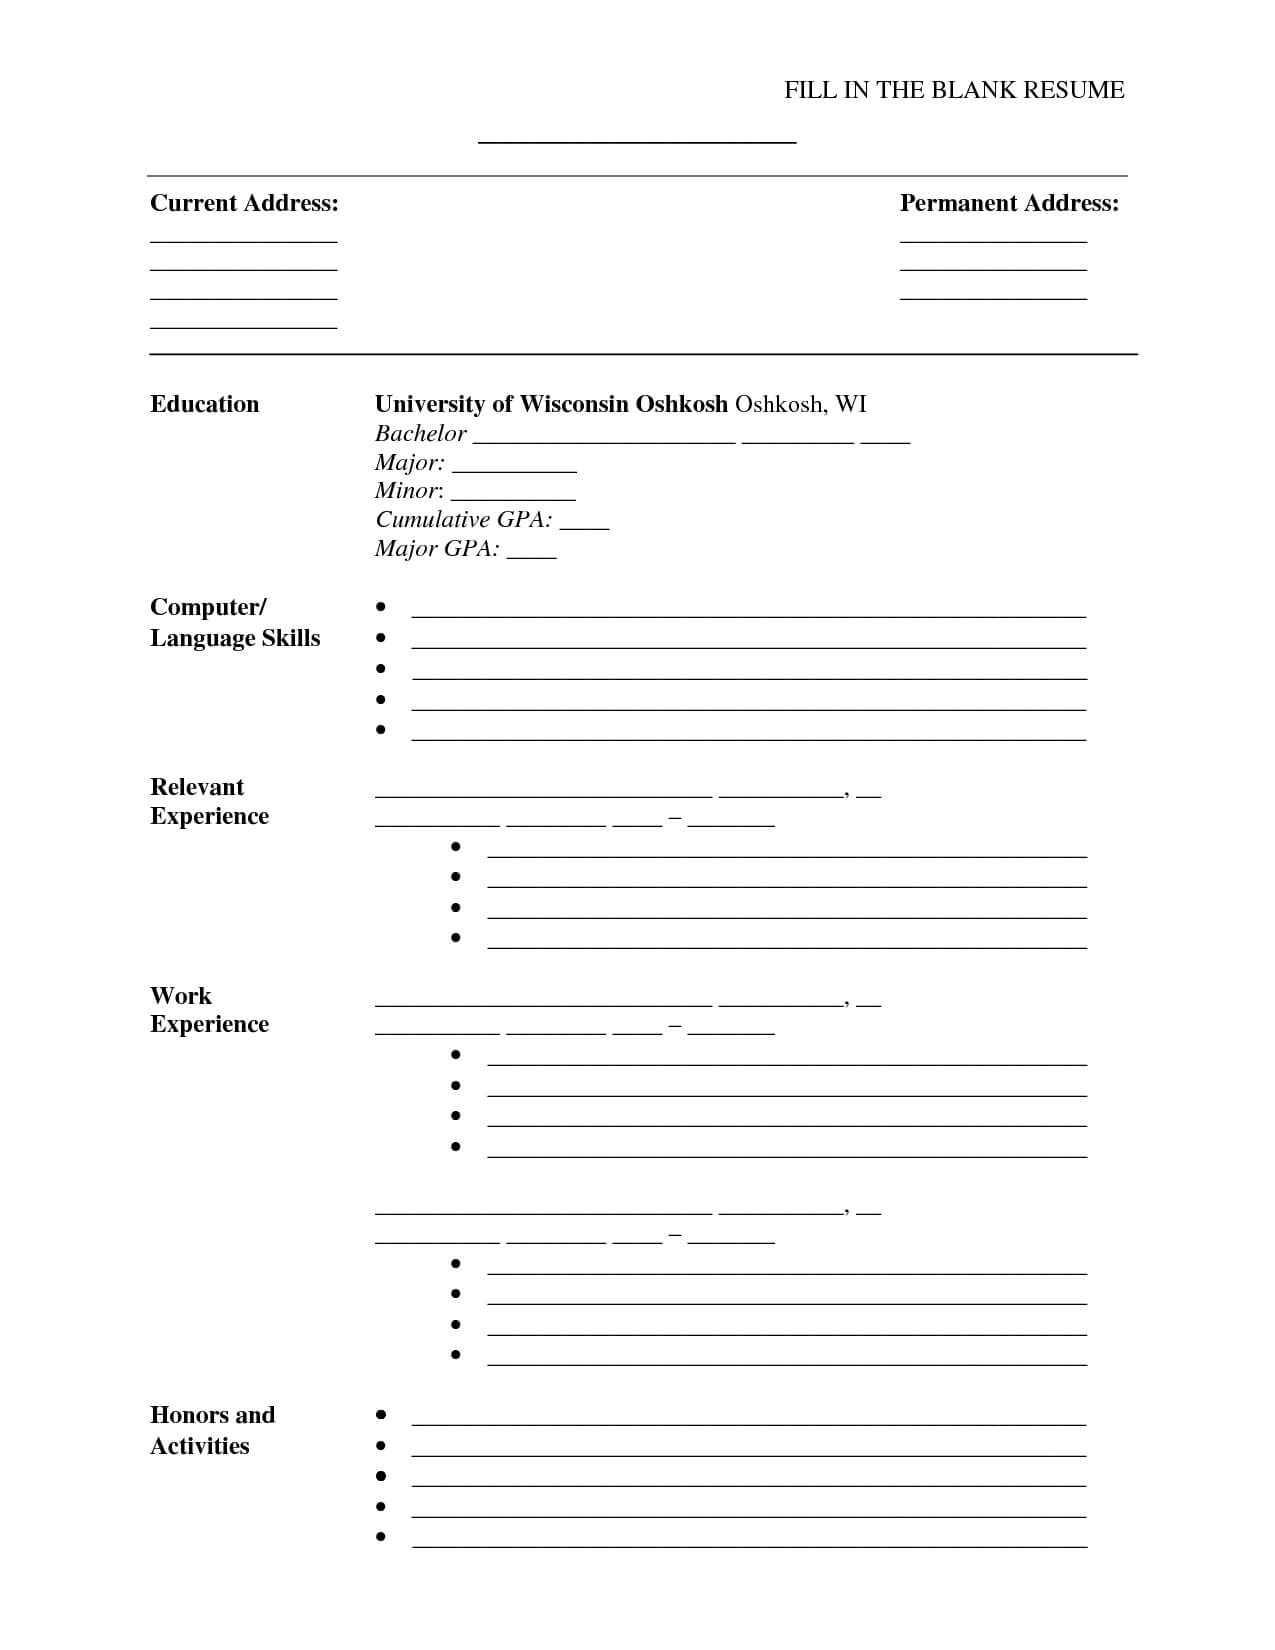 a-cv-template-to-fill-in-free-printable-resume-free-regarding-blank-resume-templates-for